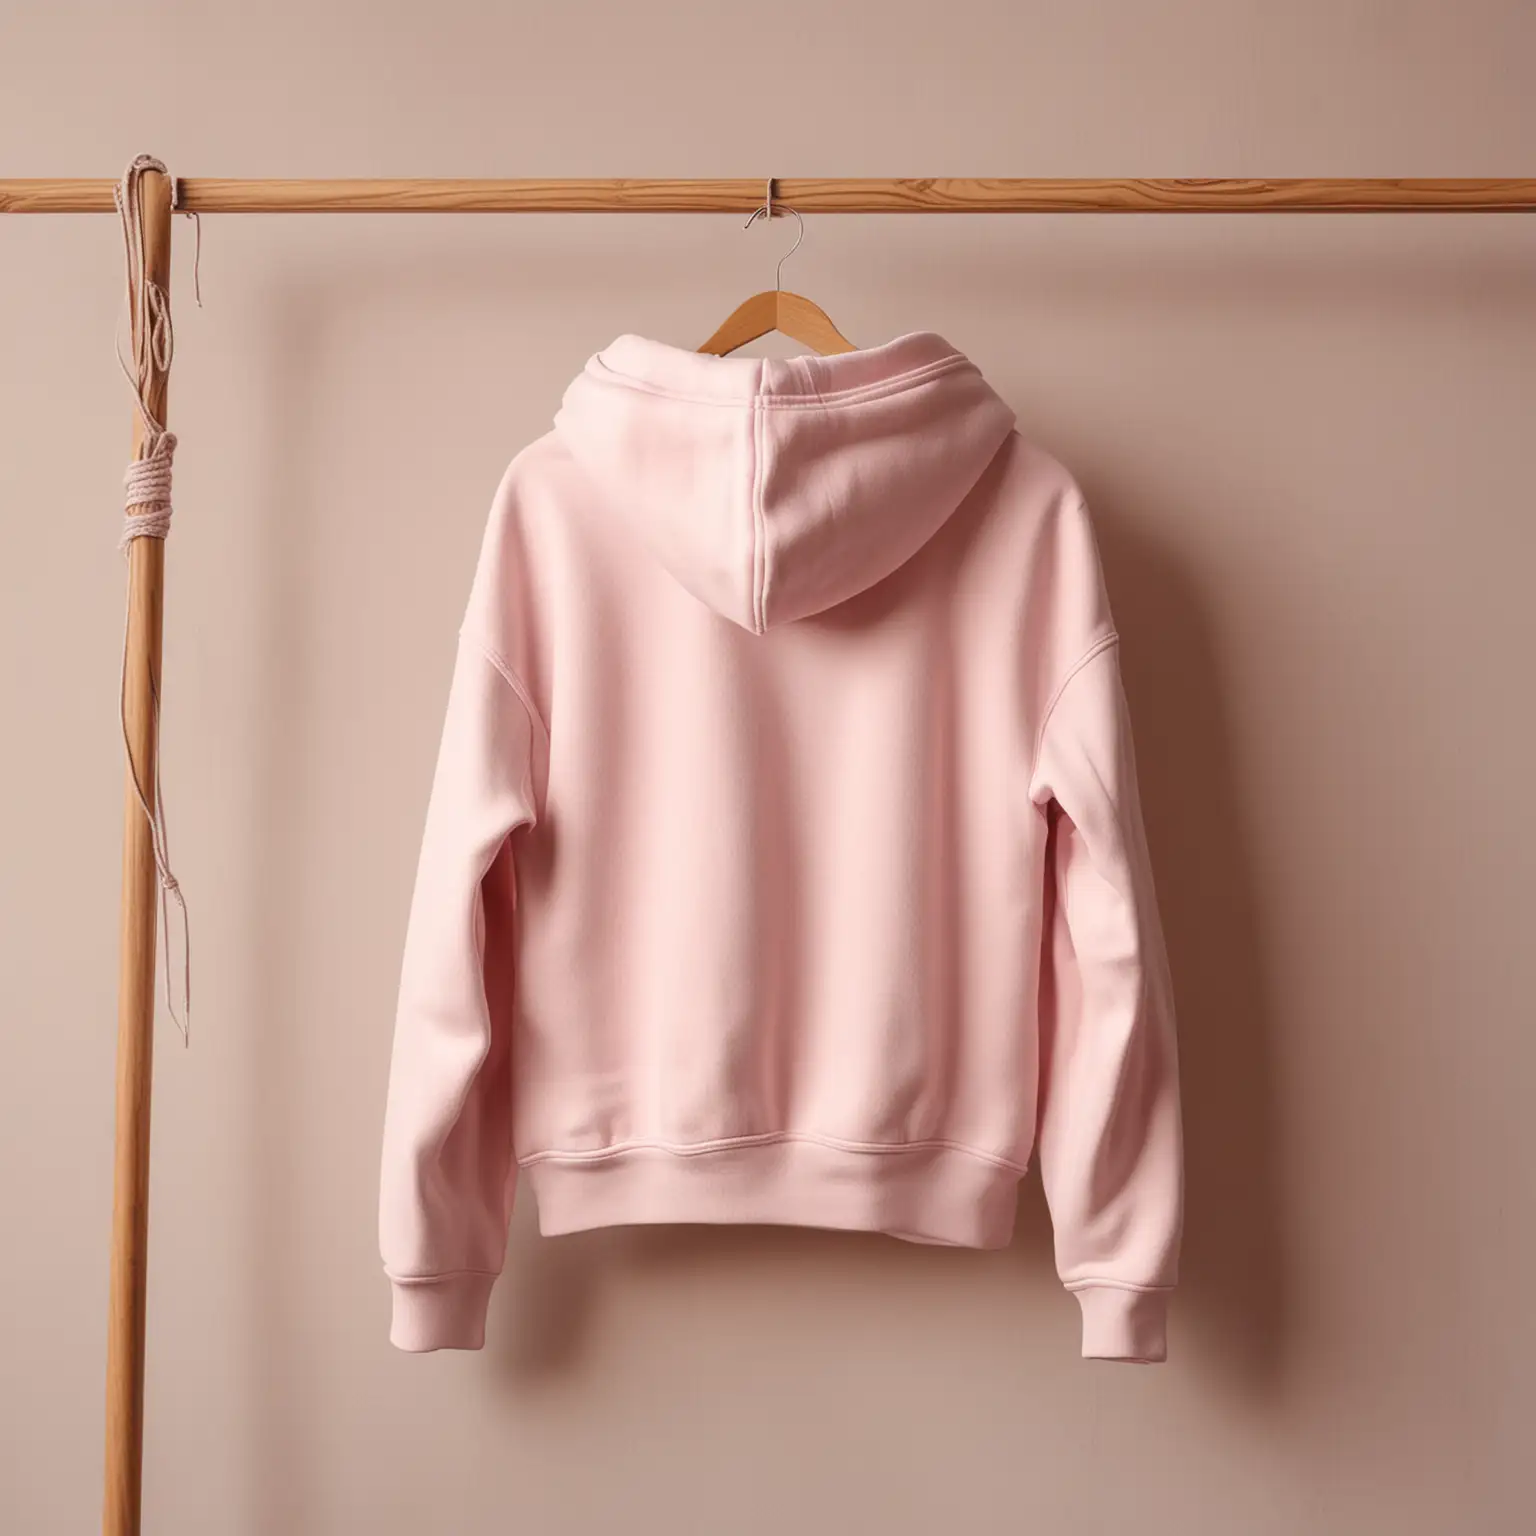 Light Pink Hoodie Hanging on Wooden Pole in Aesthetic Room